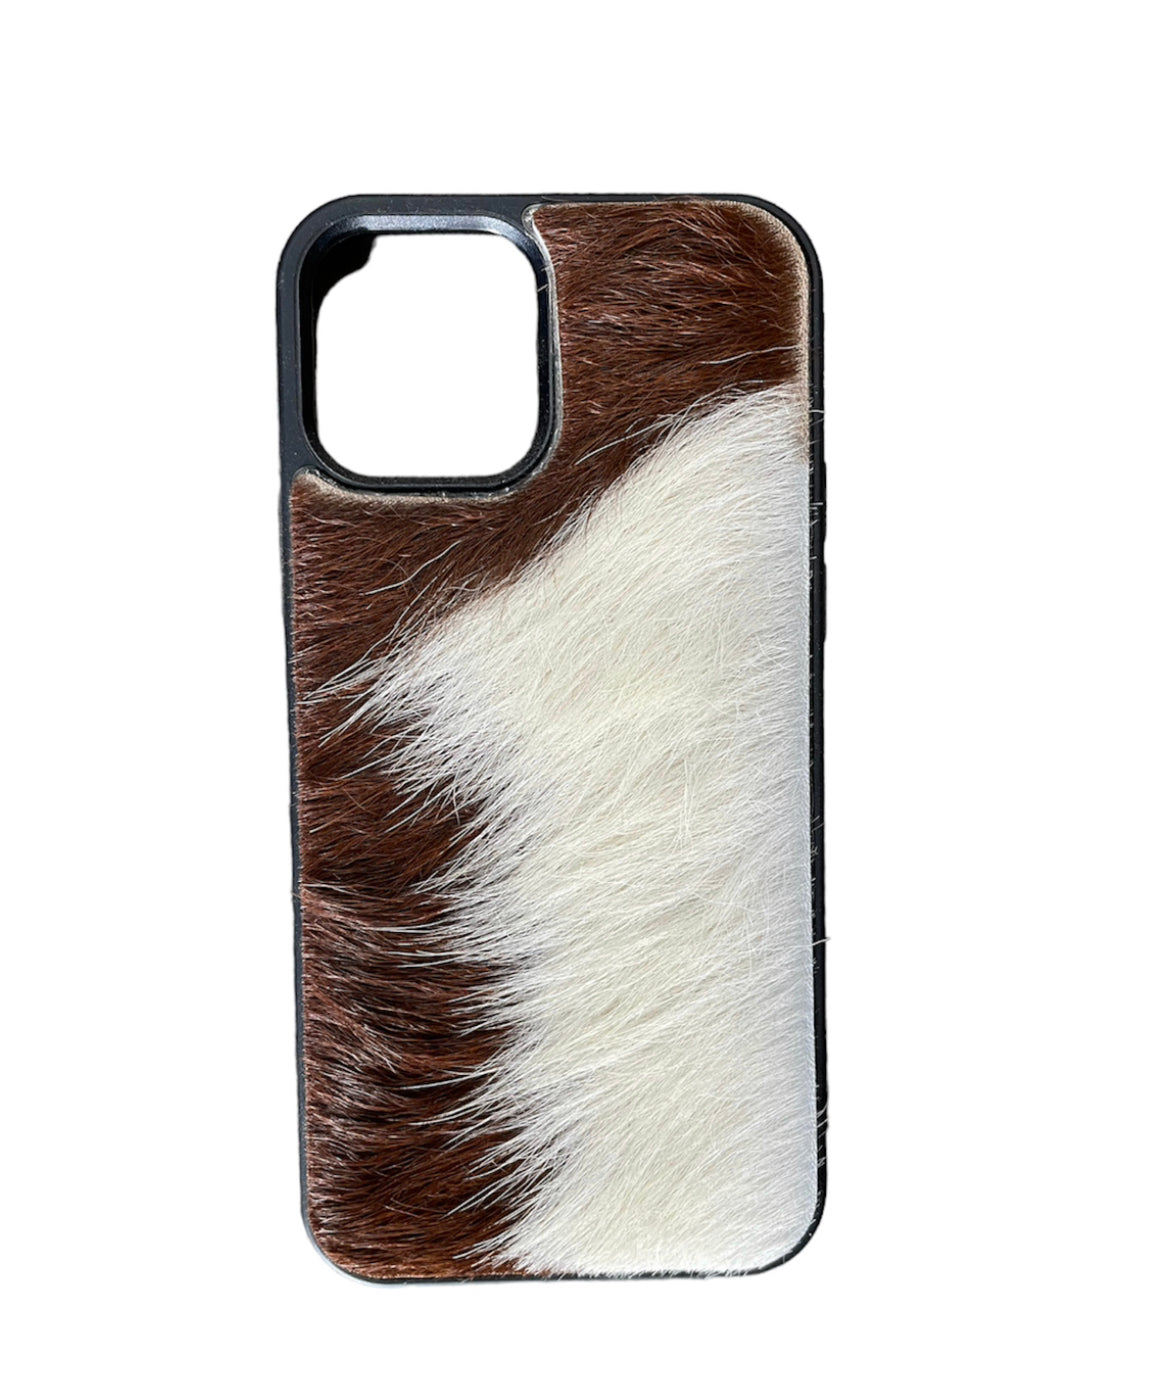 A8369 - IPhone 12 Pro Hair on Hide Leather Case